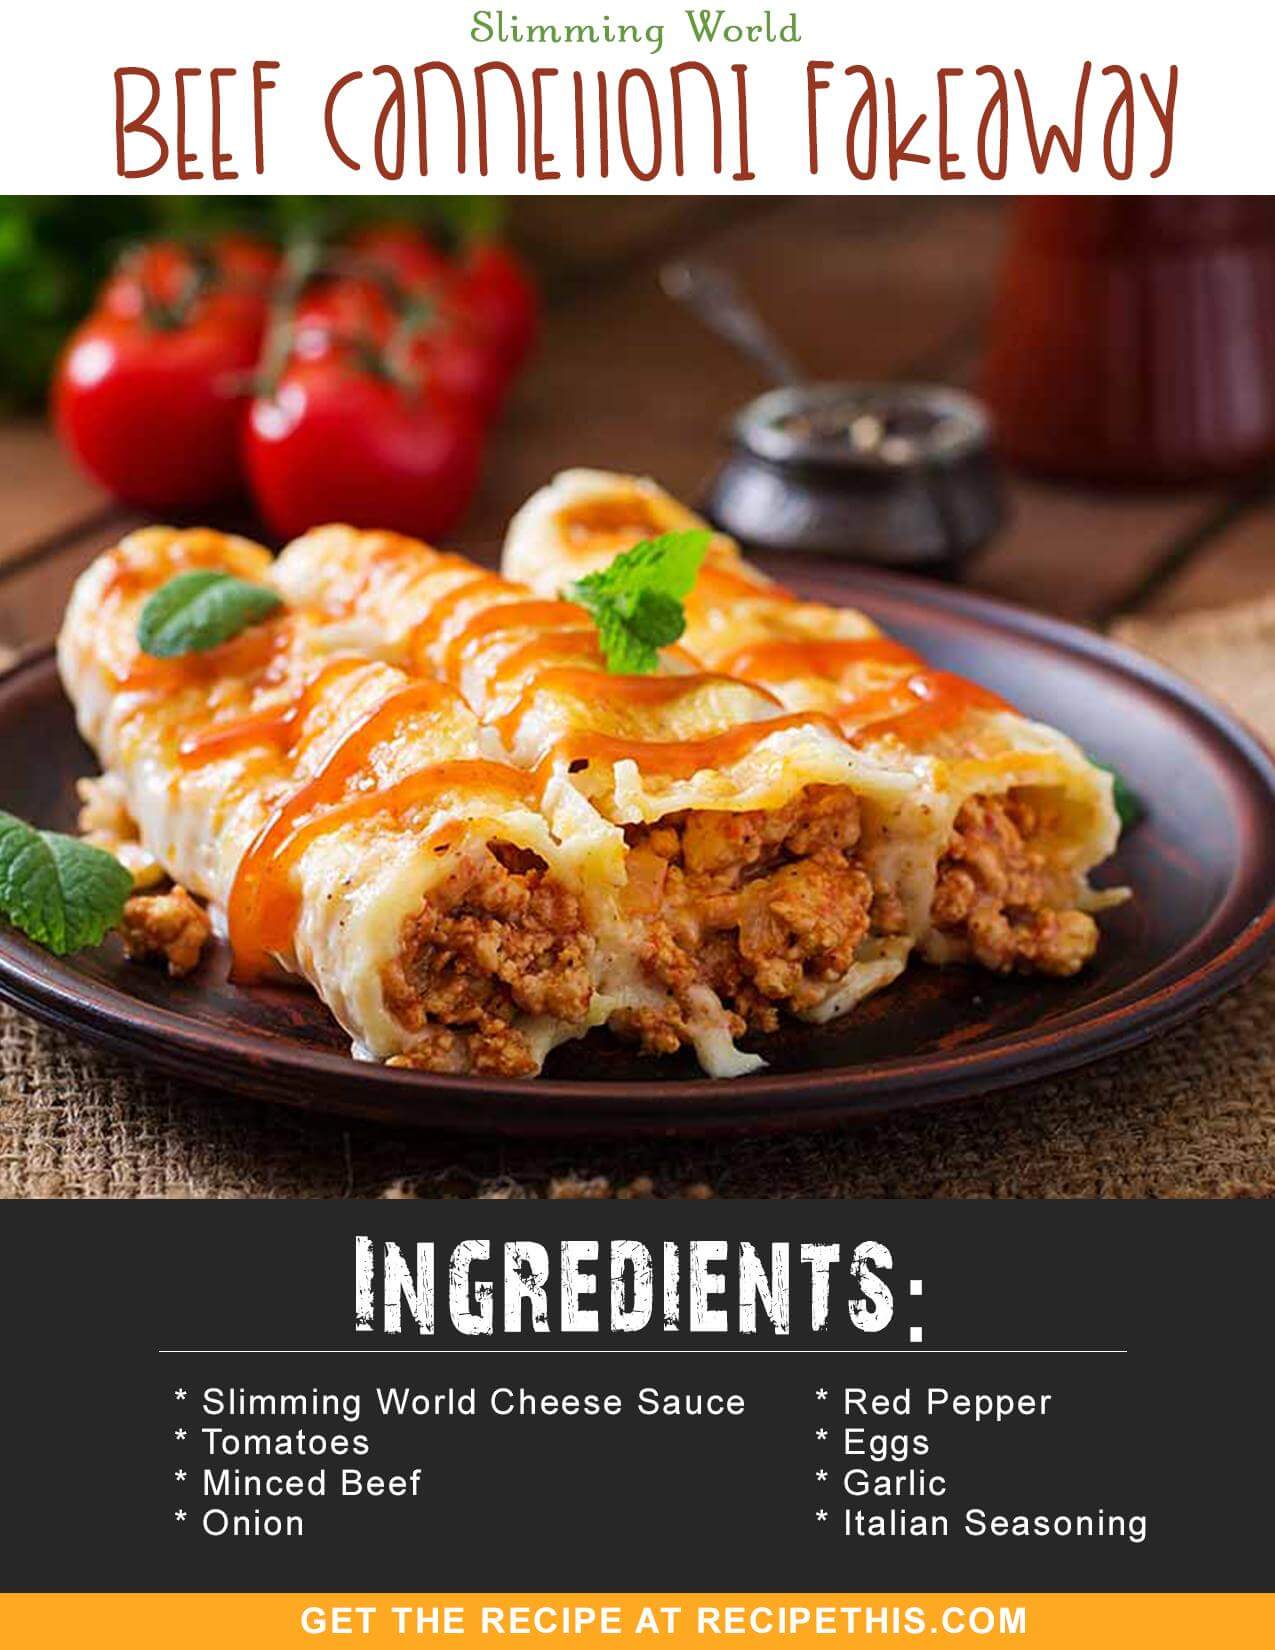 Slimming World Recipes - Slimming World Beef Cannelloni Fakeaway From RecipeThis.com